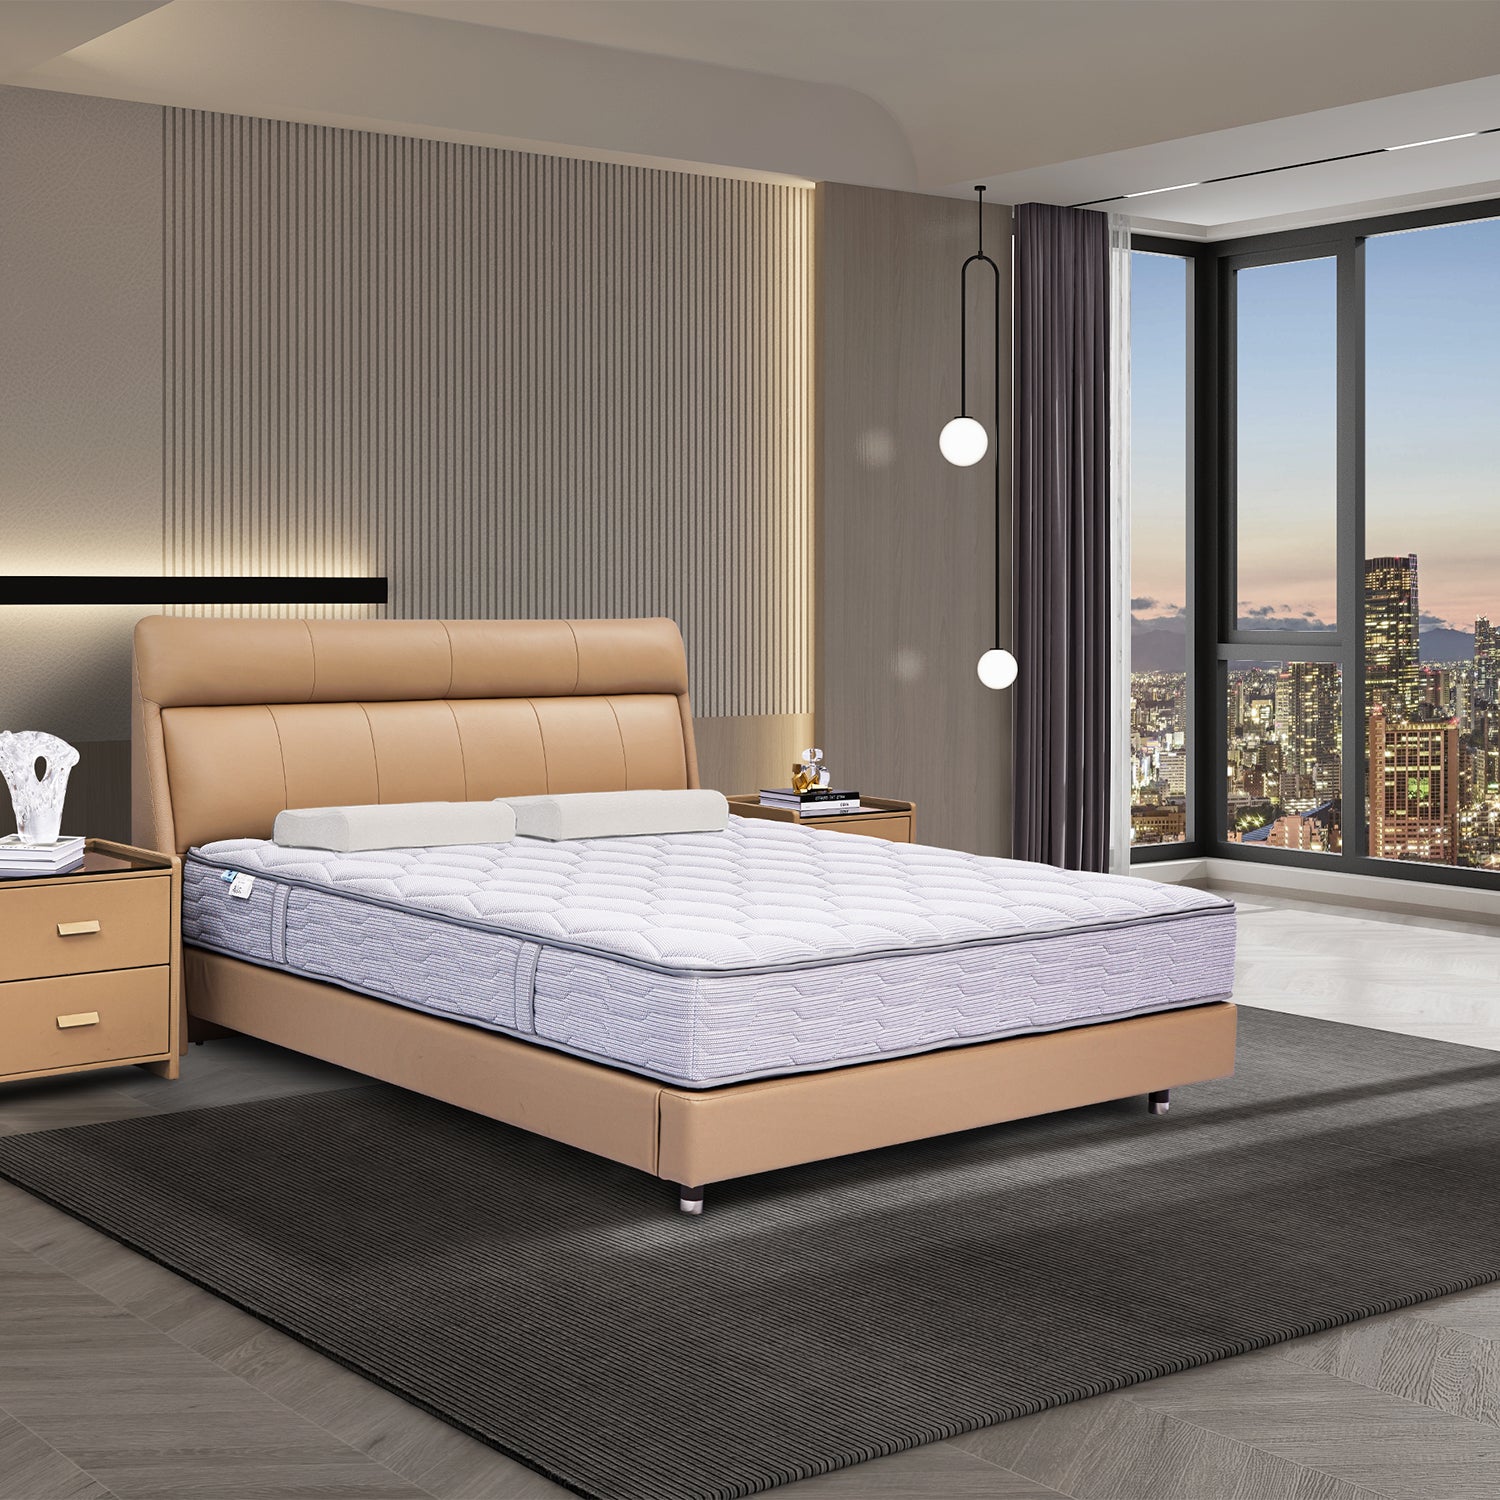 DeRUCCI Bed Frame BOC1 - 011 in a luxurious modern bedroom with light-colored leather headboard, beige nightstands, and cityscape view from the window